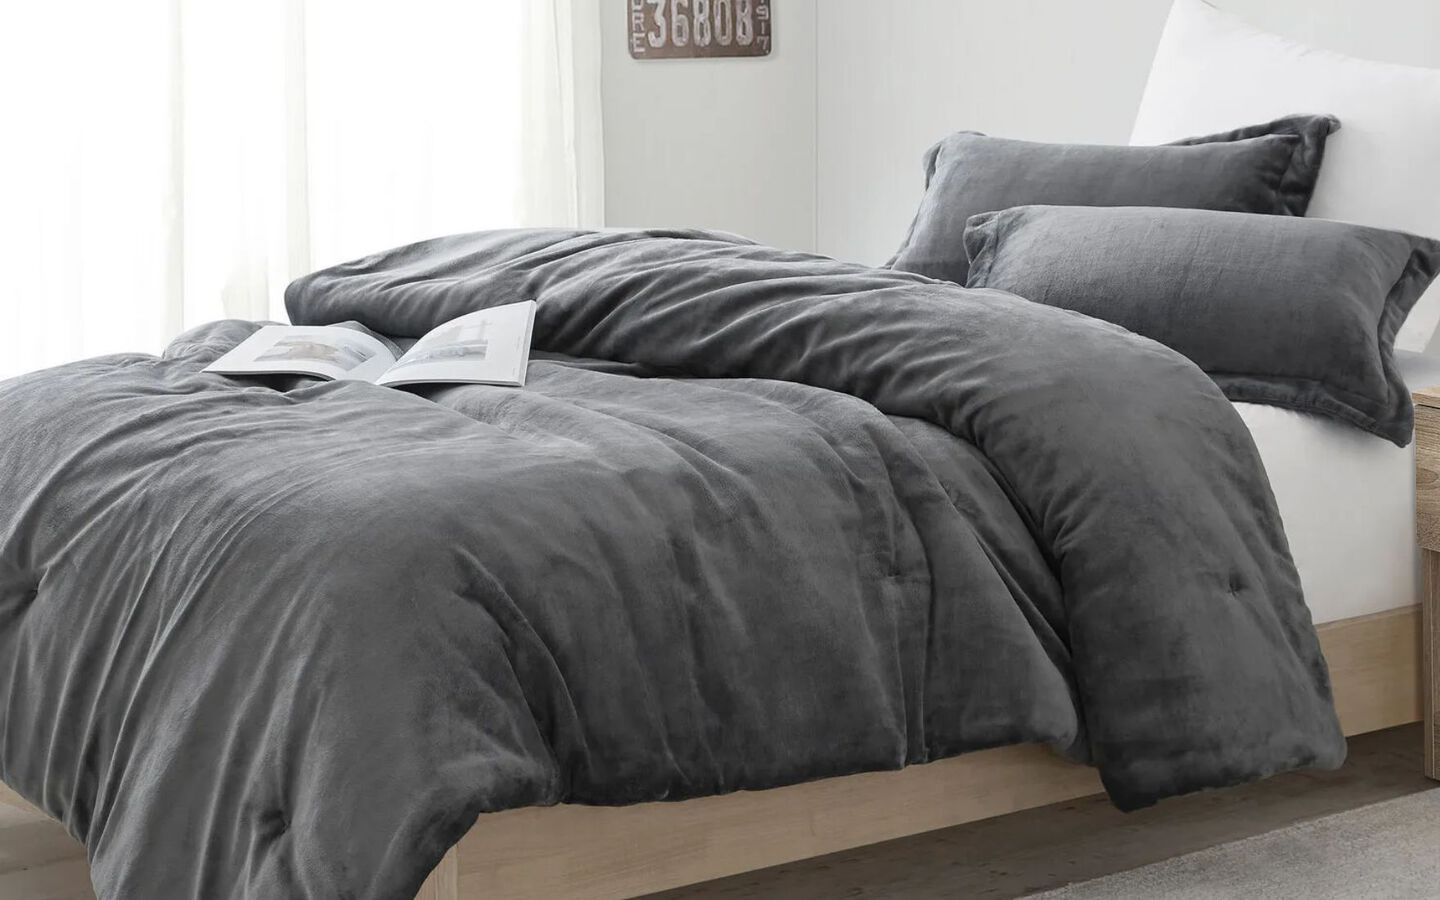 Bed with light wooden bedframe and dark grey comforter with matching pillows